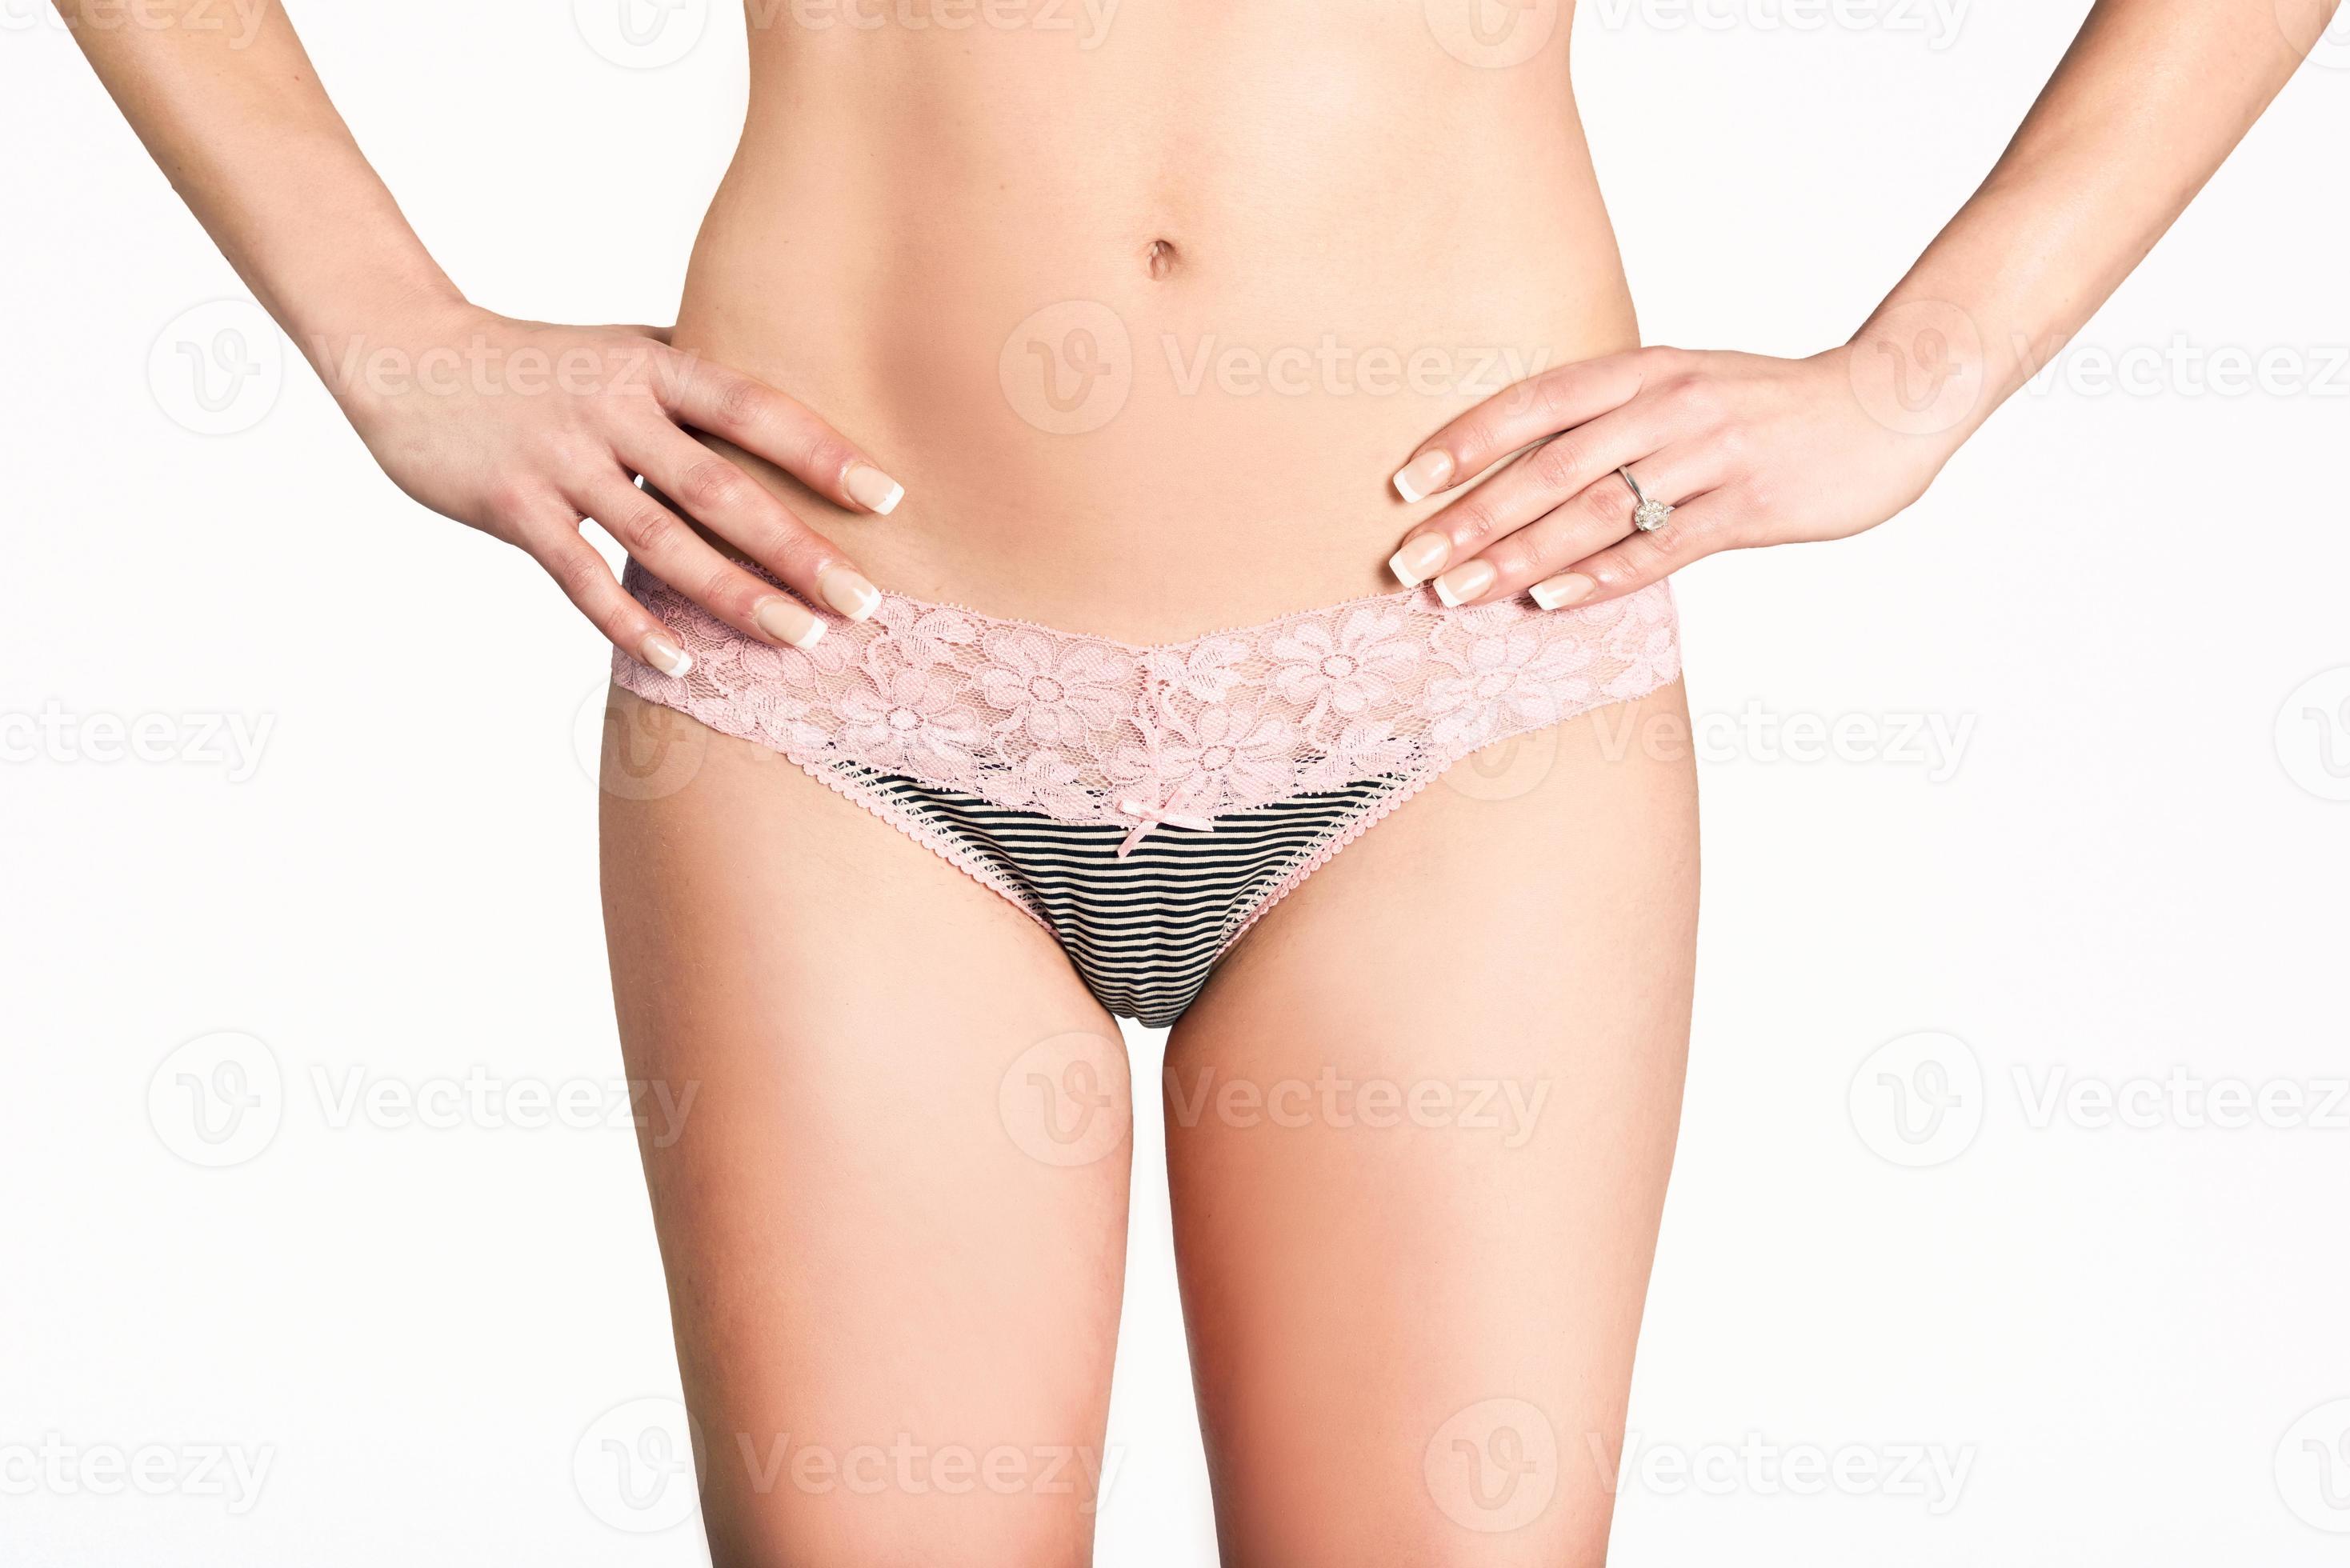 https://static.vecteezy.com/system/resources/previews/004/575/521/large_2x/sexy-woman-wearing-pink-panties-with-bow-front-view-photo.jpg